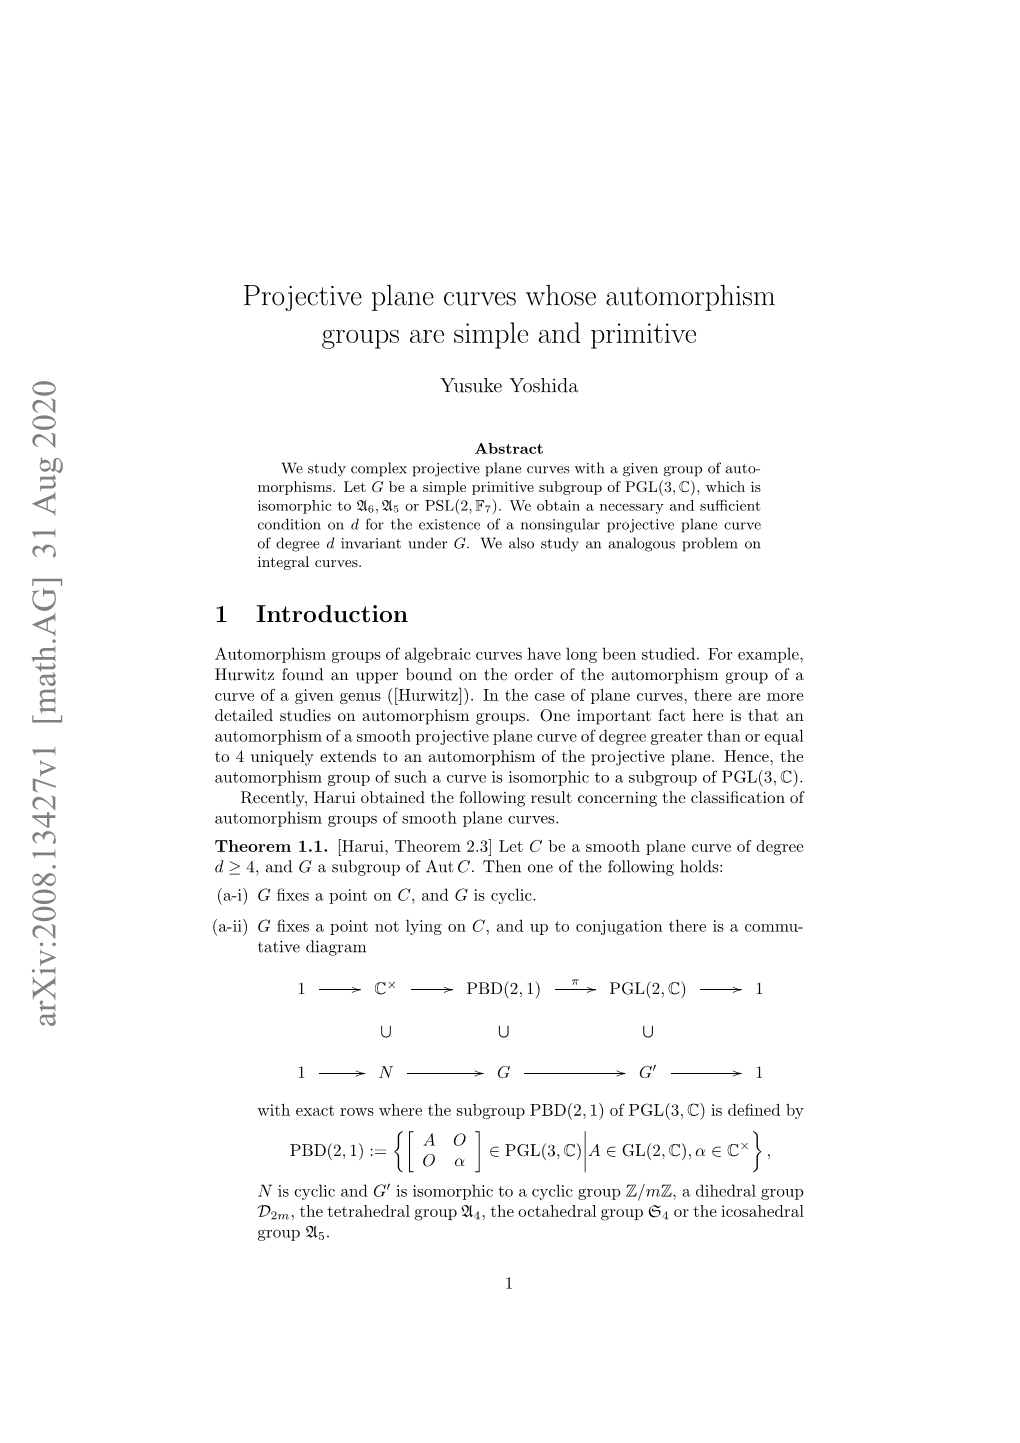 Projective Plane Curves Whose Automorphism Groups Are Simple and Primitive